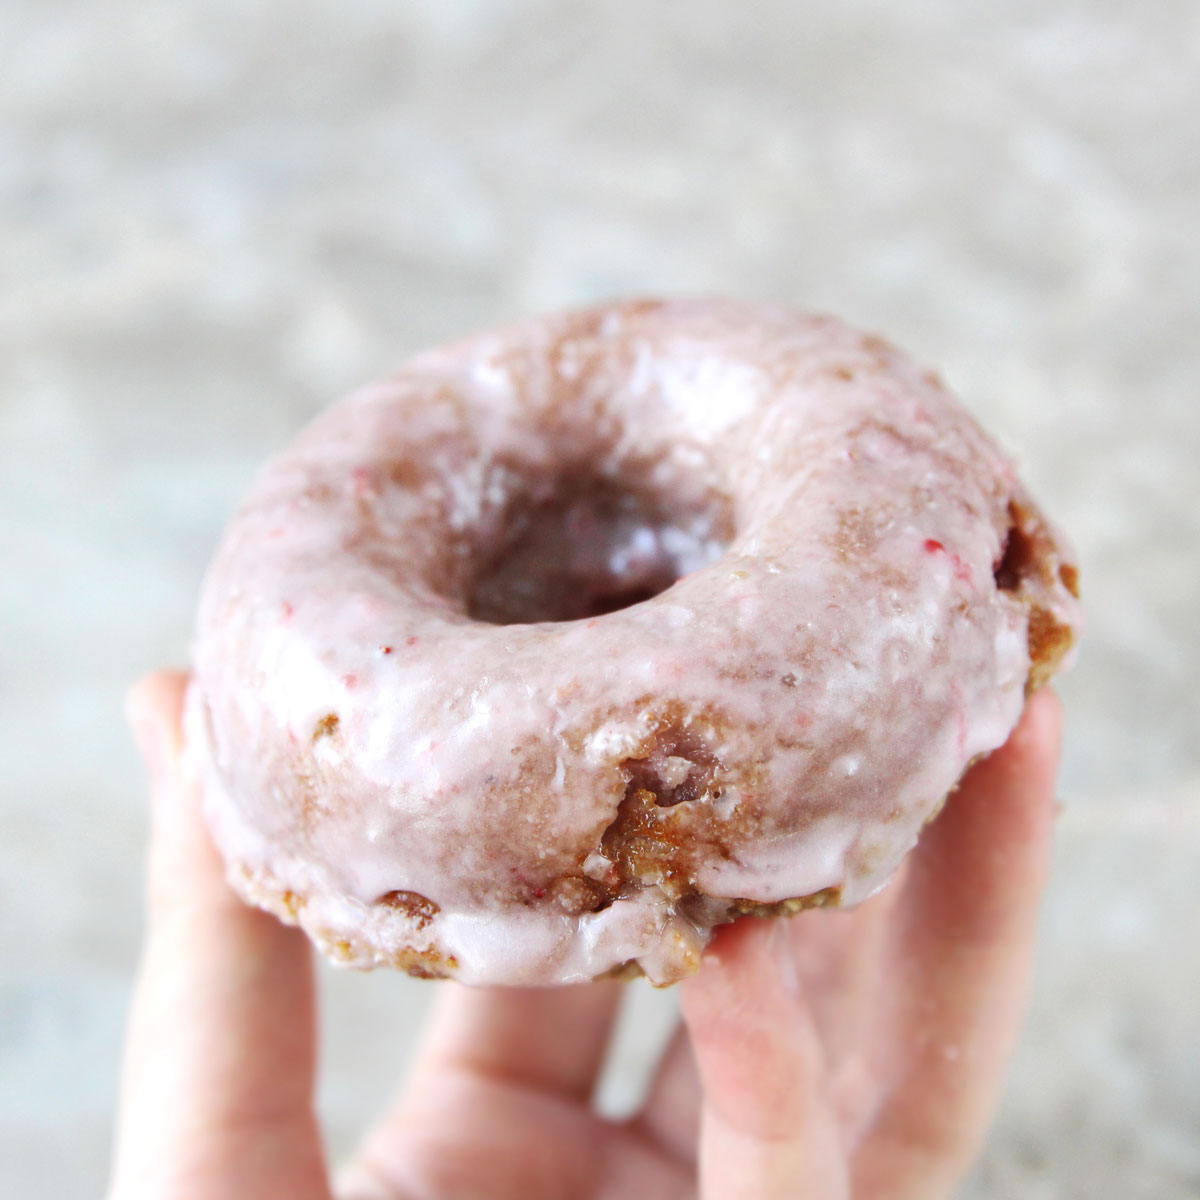 How to Make Paleo Baked Strawberry Donuts (Gluten-Free) - Peanut Clusters with Collagen